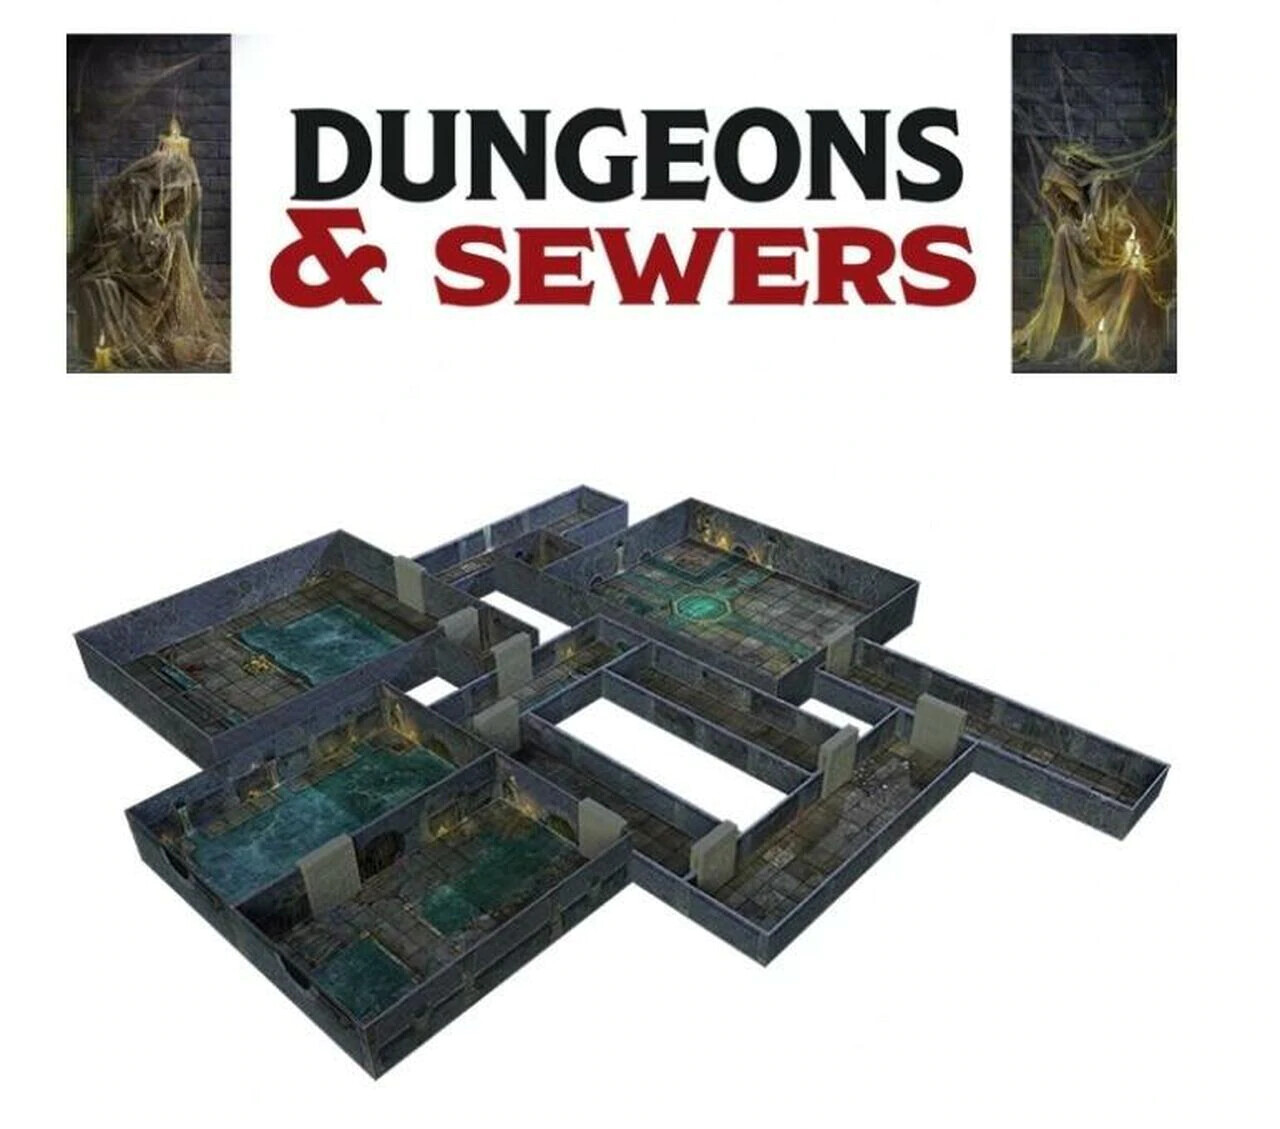 Tenfold Dungeon: Dungeon & Sewers